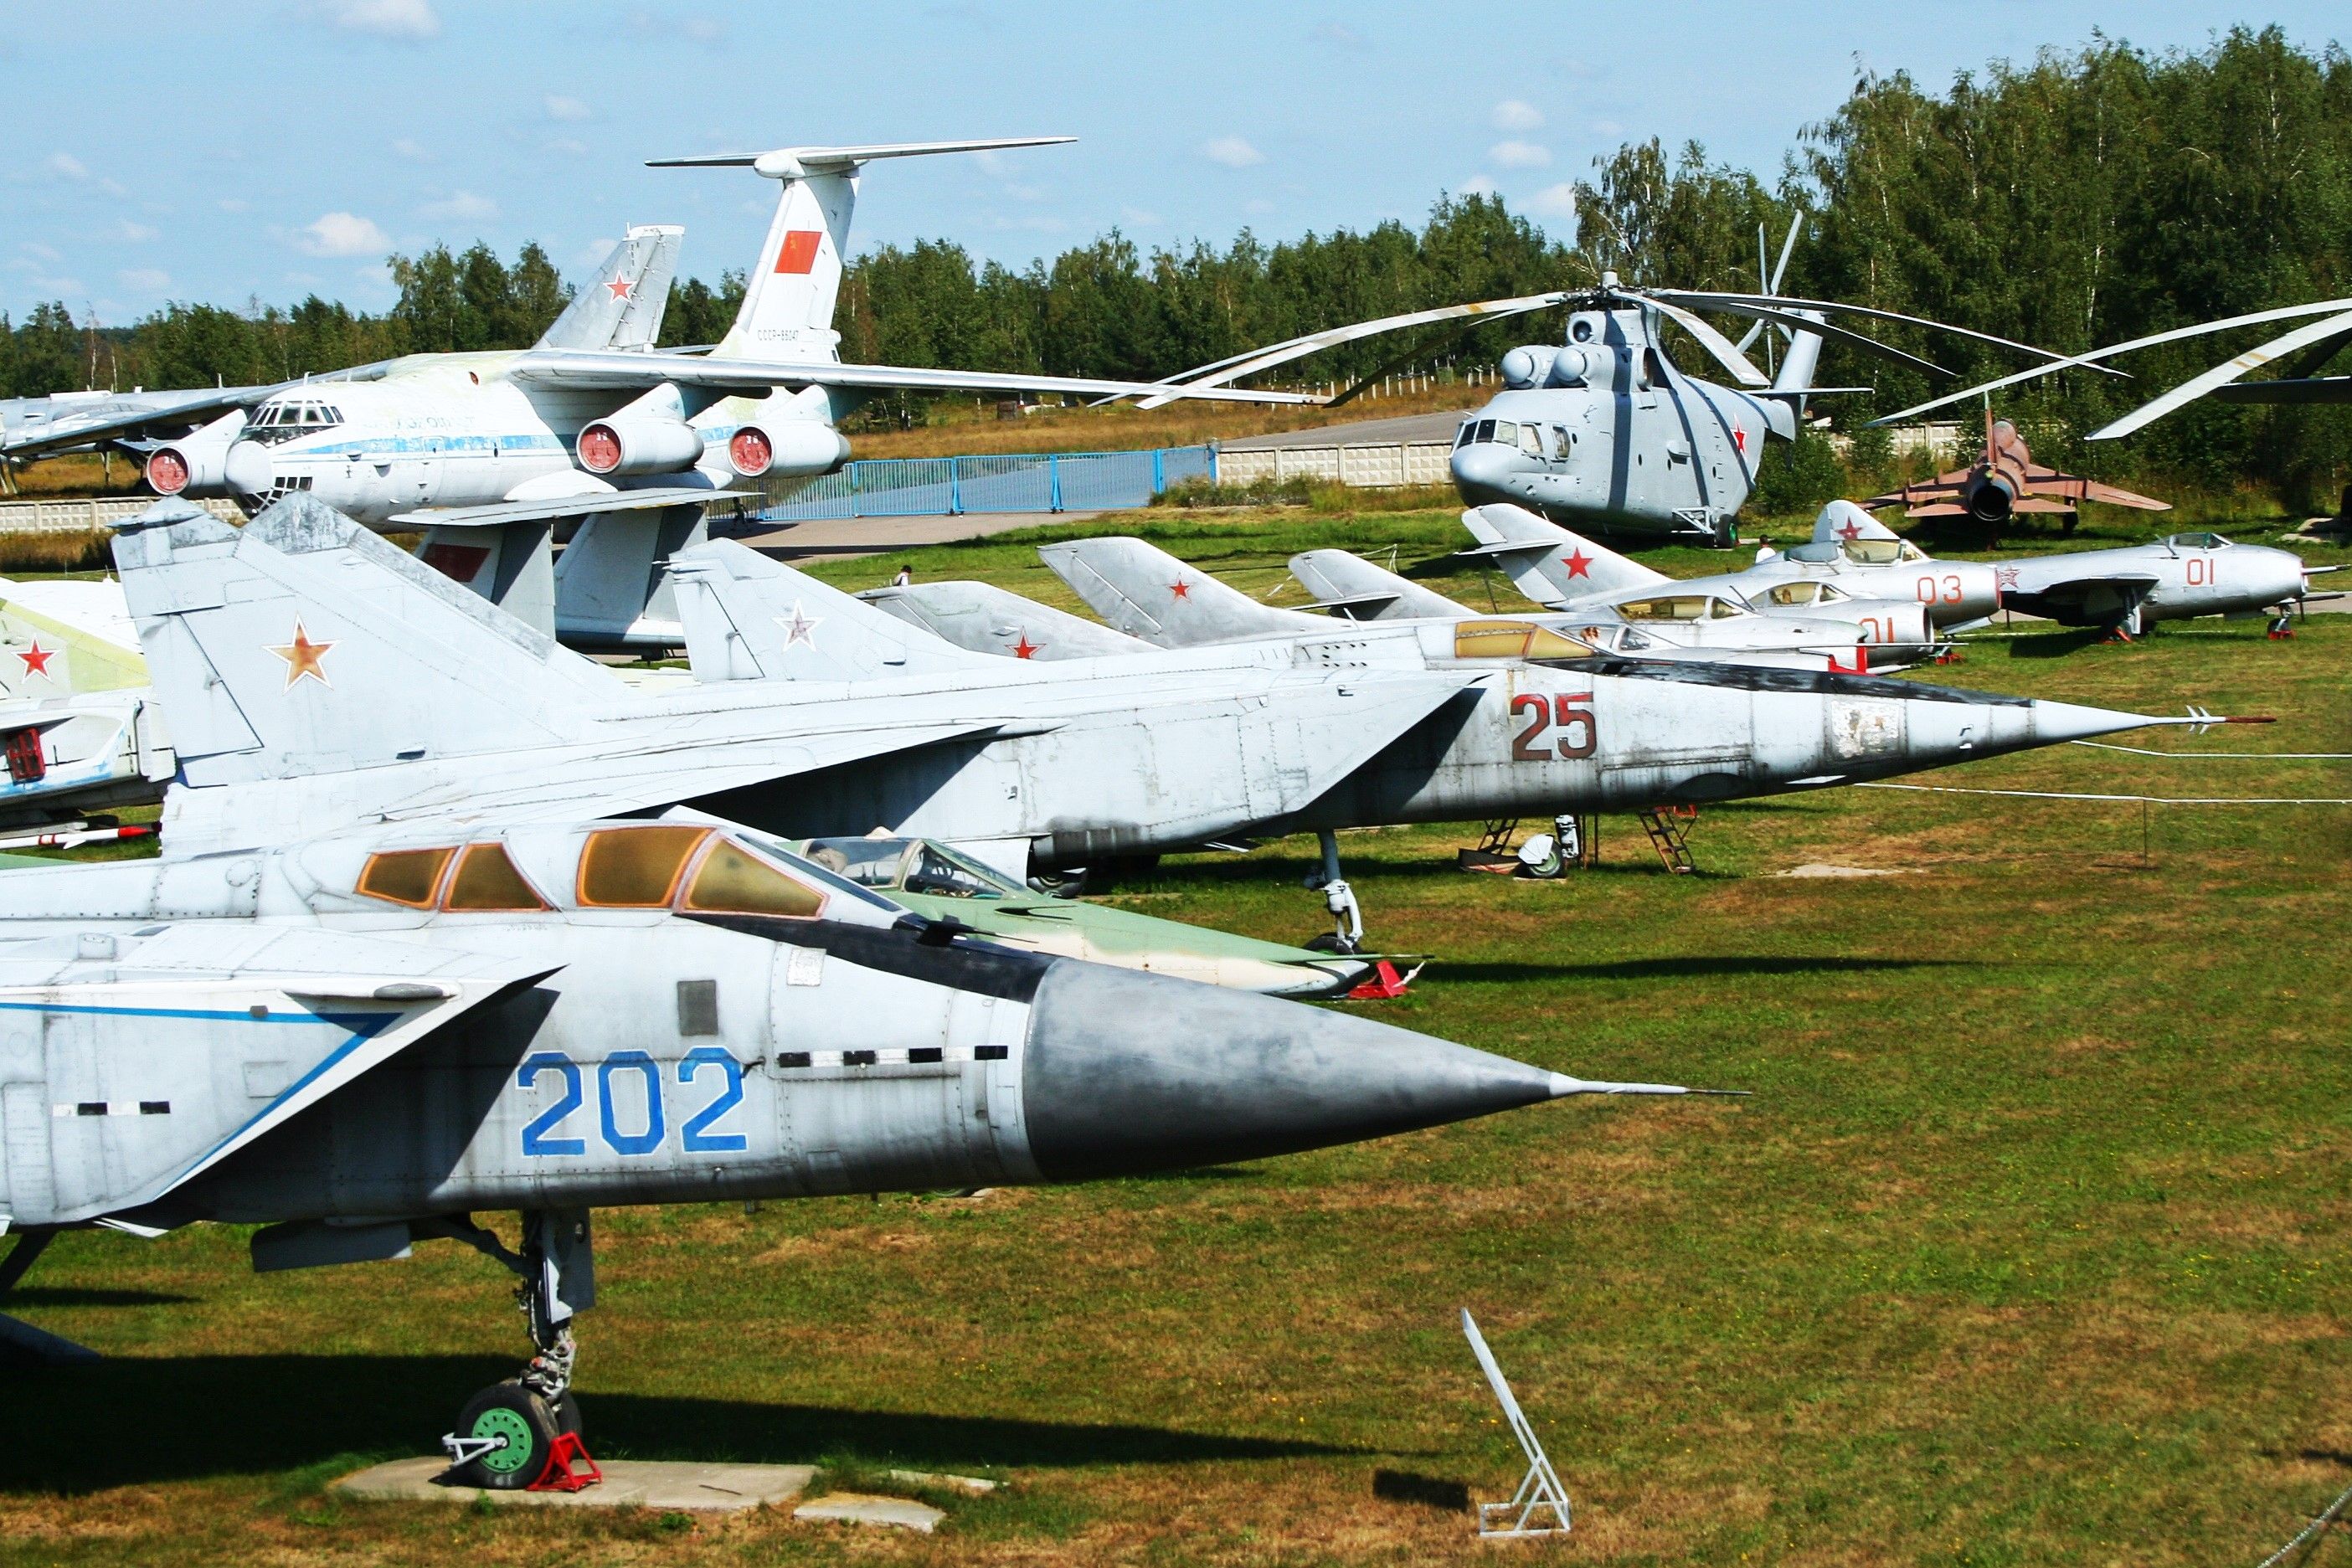 MiG_Alley_at_Monino_10060272626 - Taken from the Tu-144 access steps, this shot shows the main row of MiG fighters at Monino. From near to far:- MiG-31 '202 blue', MiG-27 '01 red', MiG-25R '25 red', MiG-23 '231 blue' MiG-21S '93 red', MiG-19PM '11 red' MiG-17 '01 red' MiG-15UTI '03 red' and MiG-9 '01 red'. Visible in the far background are a Tu-95 'Bear', an IL-76, a Mil-26 'Halo' and an Su-17 'Fitter'. Individual photos and details of all these aircraft appear elsewhere in this set. All are o